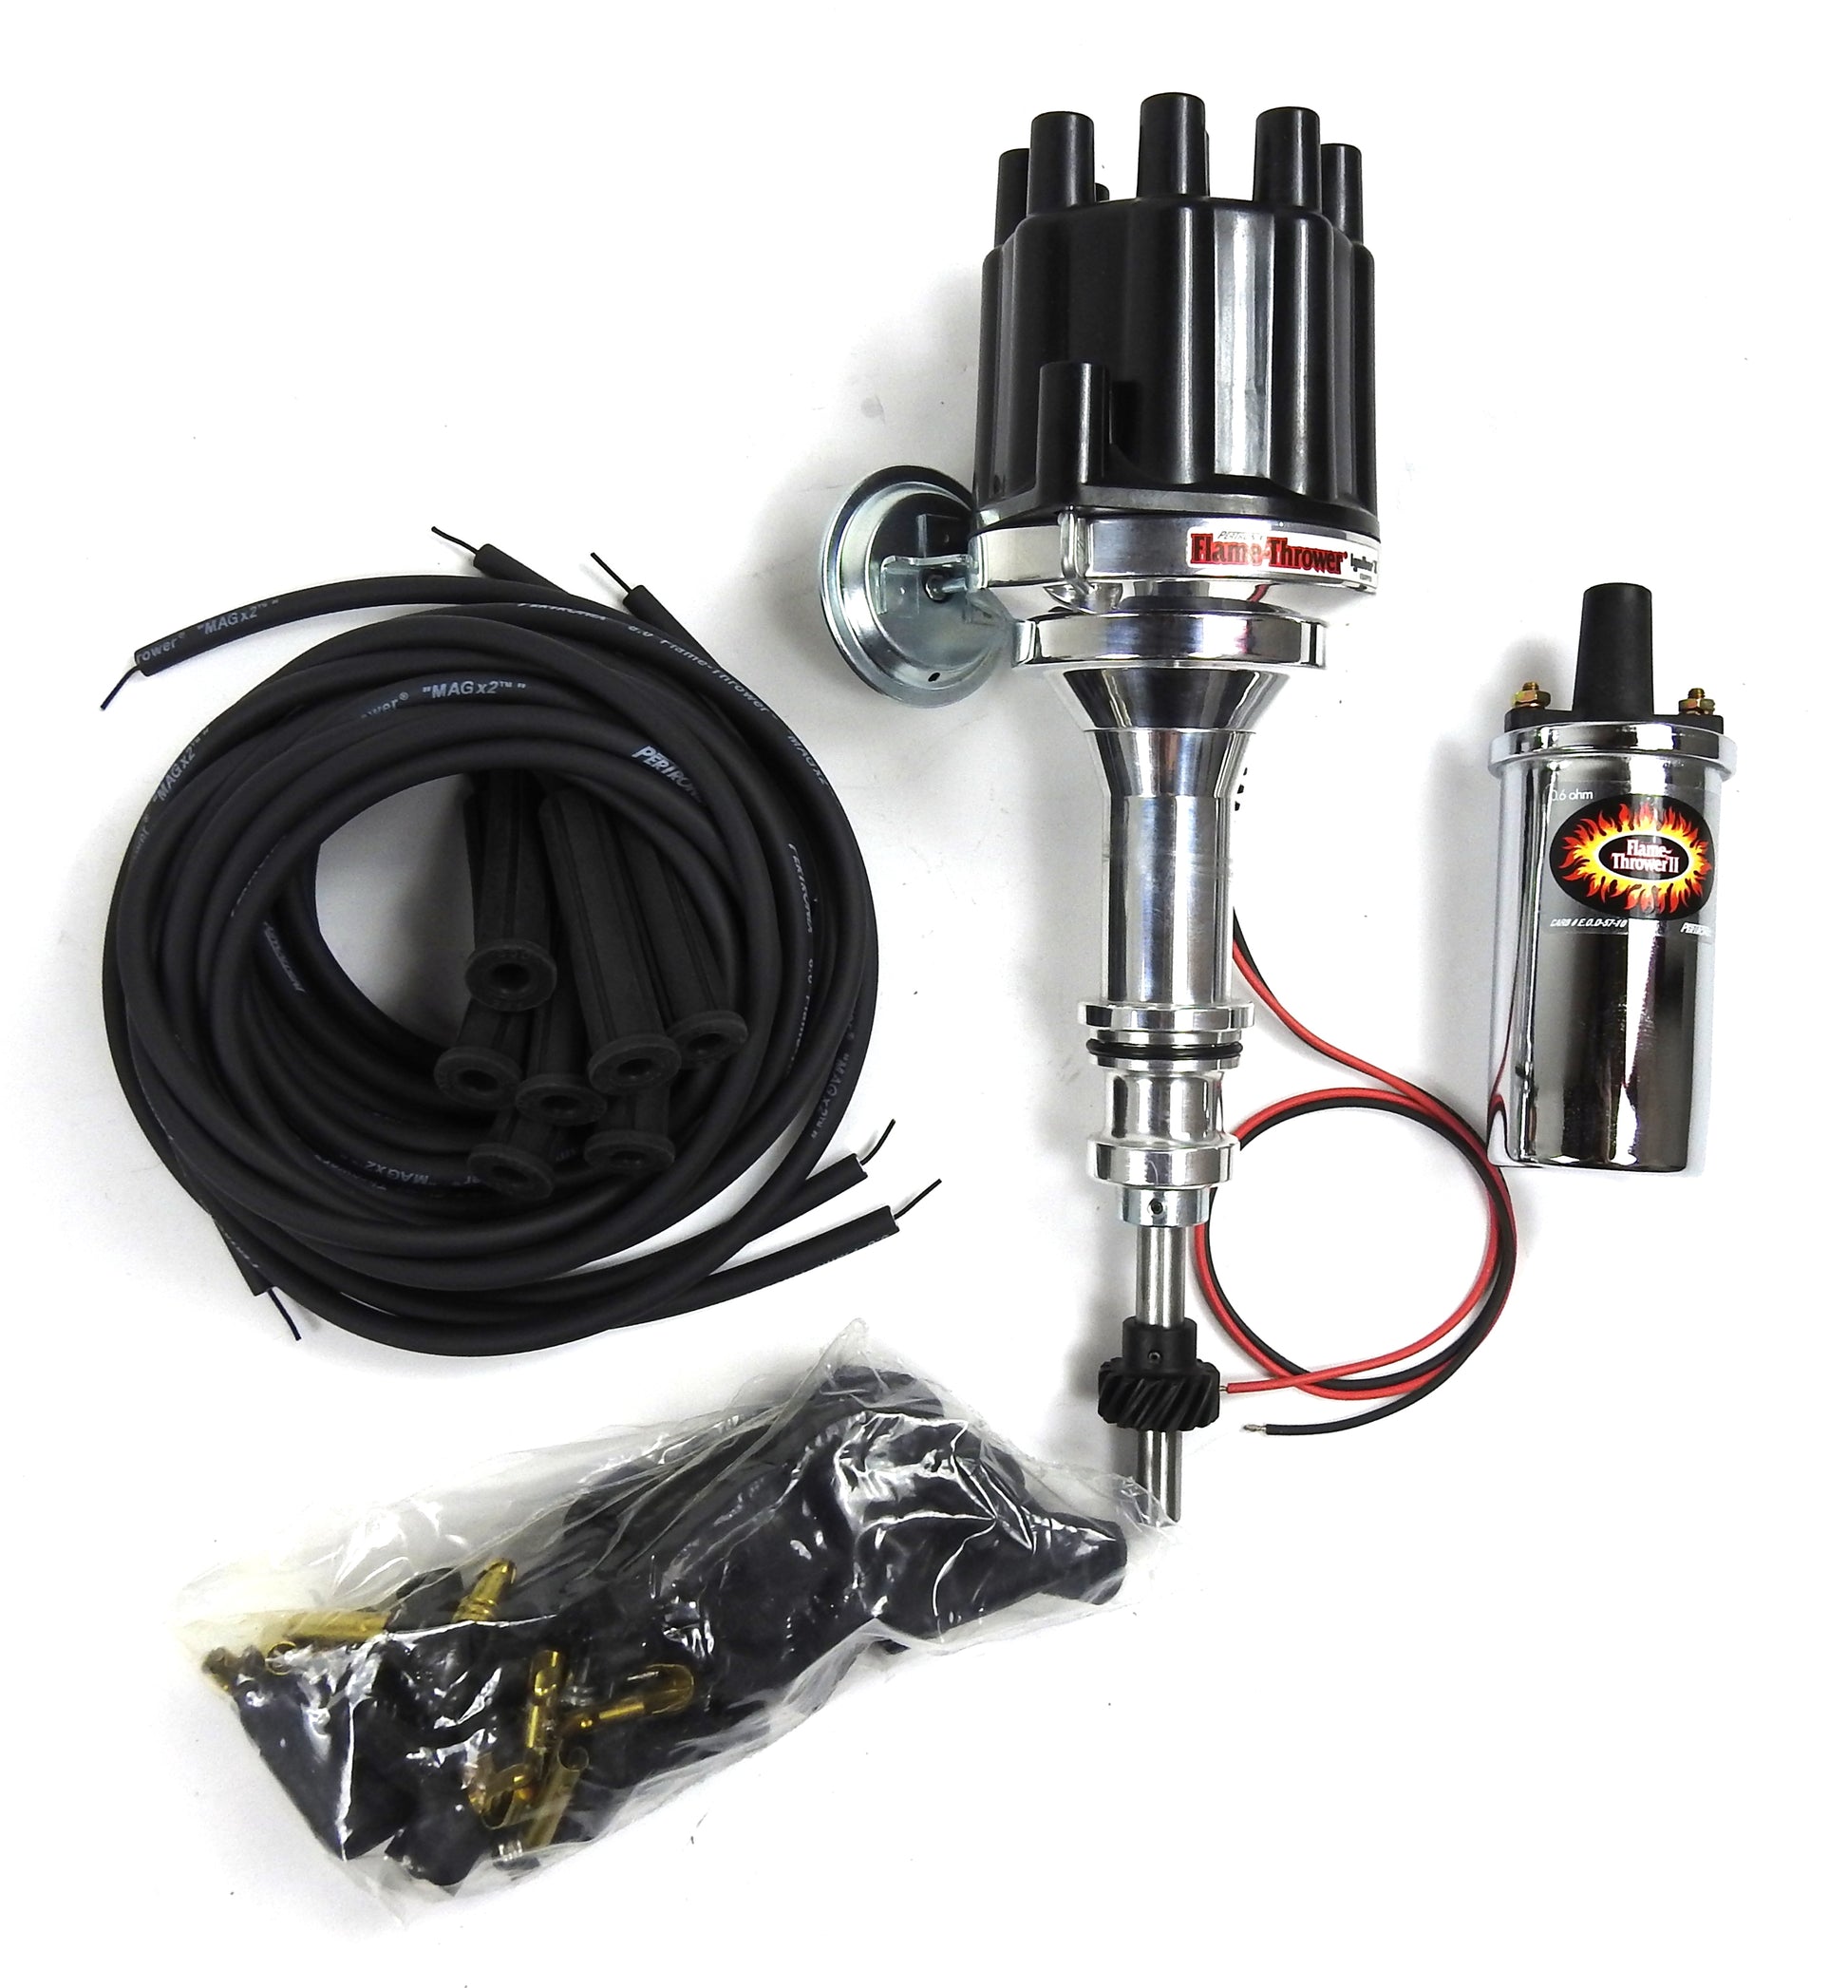 Pertronix Bundle008 Ignition Kit includes Ford 351W Billet Plug n Play Distributor with Black Female Cap, Flame-Thrower II Chrome Coil, Flame-Thrower MAGx2 Universal Black Spark Plug Wires with 180 degree plug boot ends